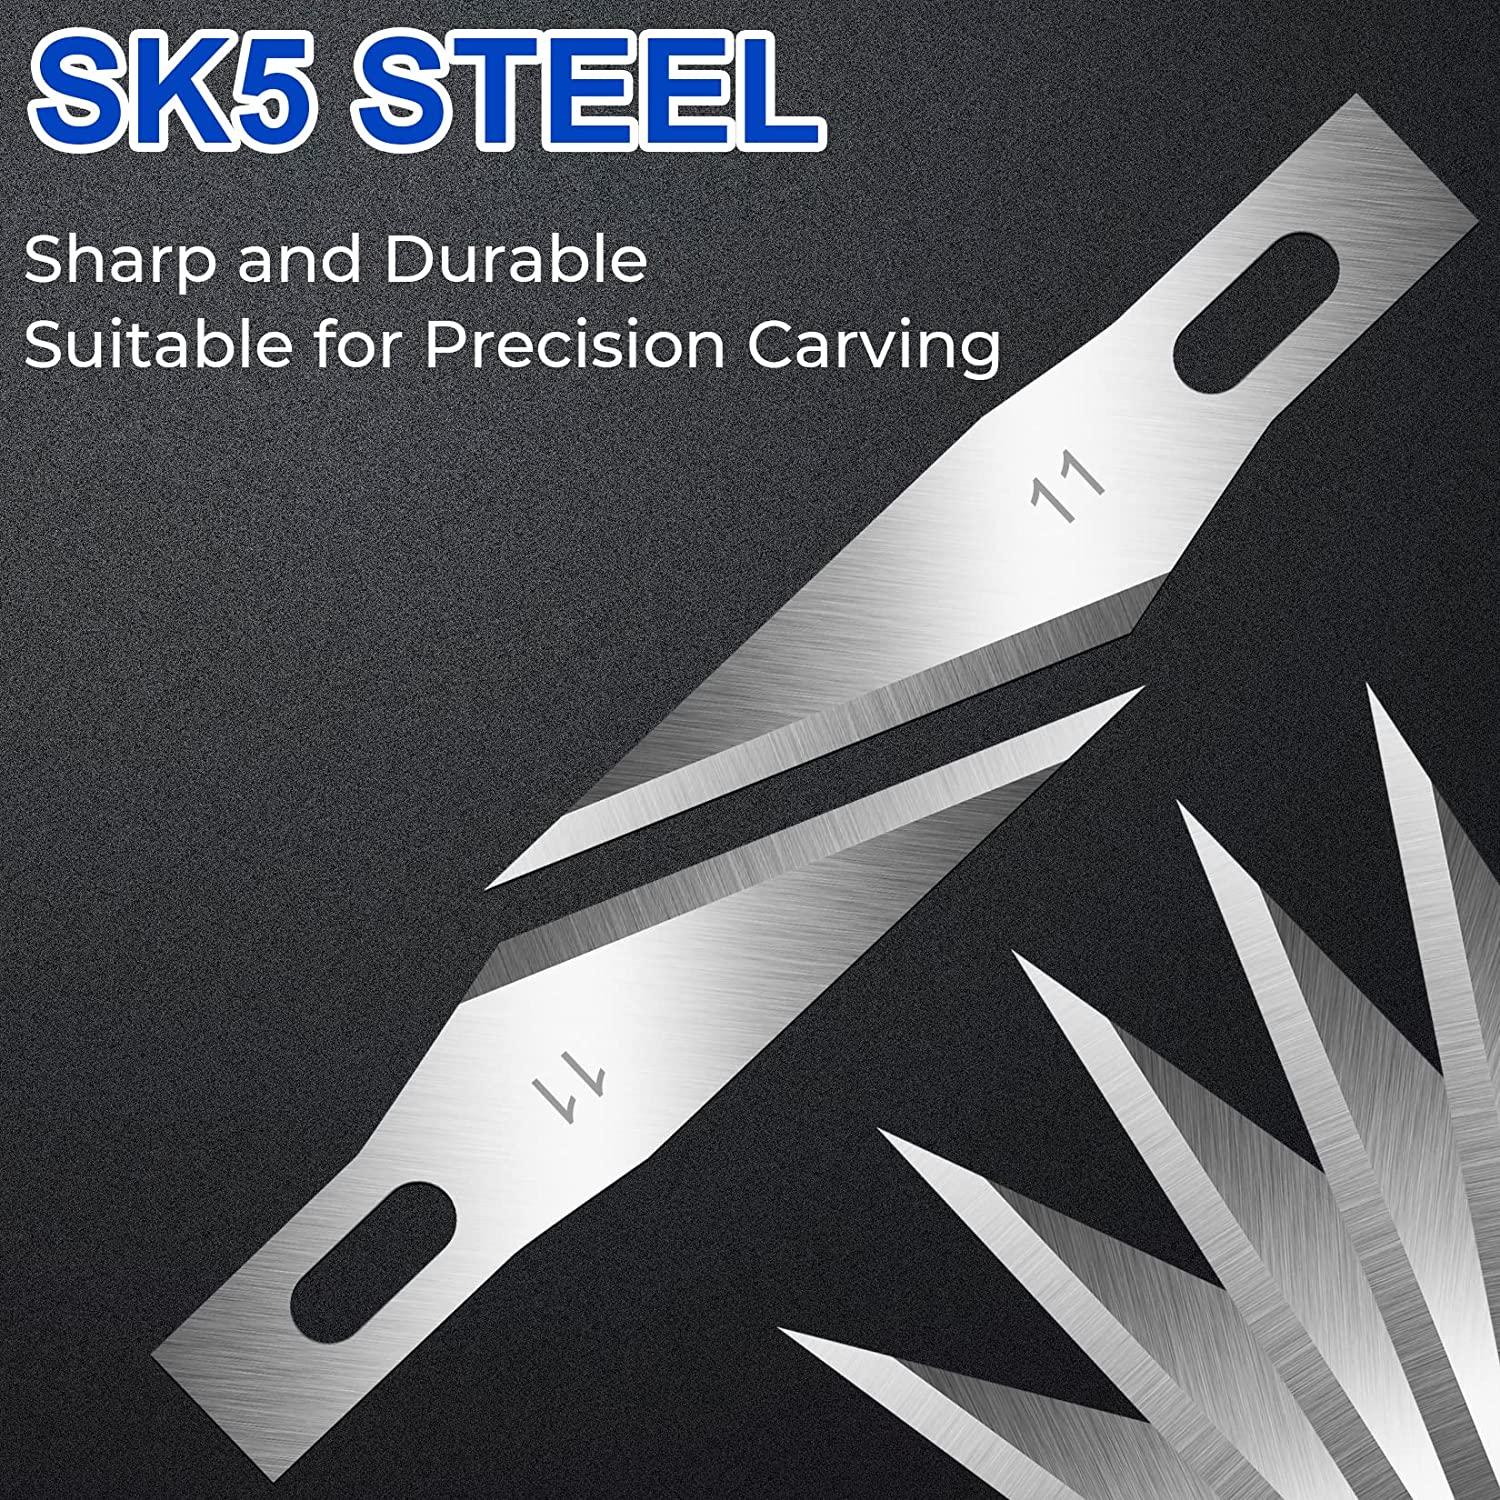  DIYSELF 100 PCS Exacto Knife Blades, SK5 Carbon Steel #11  Exacto Blades Refill Craft Art Knife Replacement Blades with Storage Case  for Craft, Hobby, Scrapbooking, Stencil : Arts, Crafts & Sewing